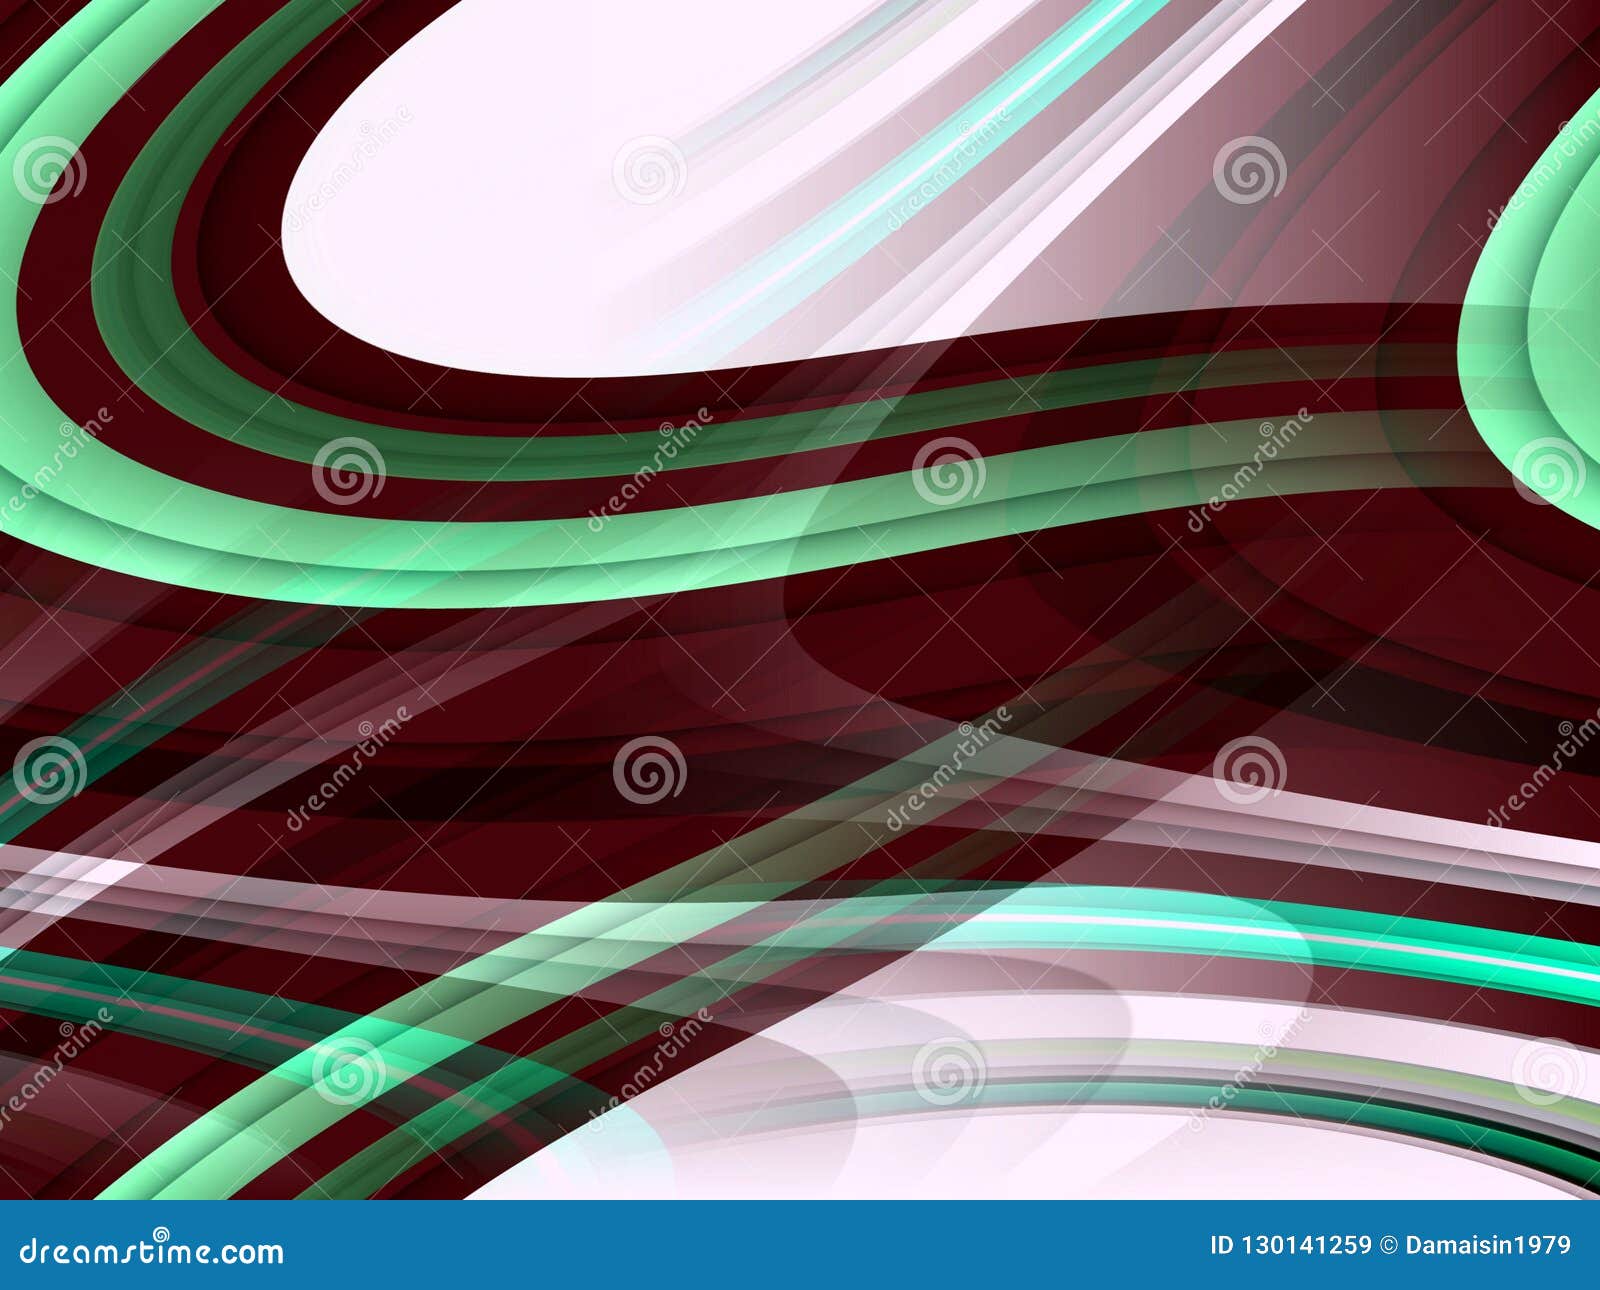 green violet white silvery fluid lines background, abstract colorful geometries